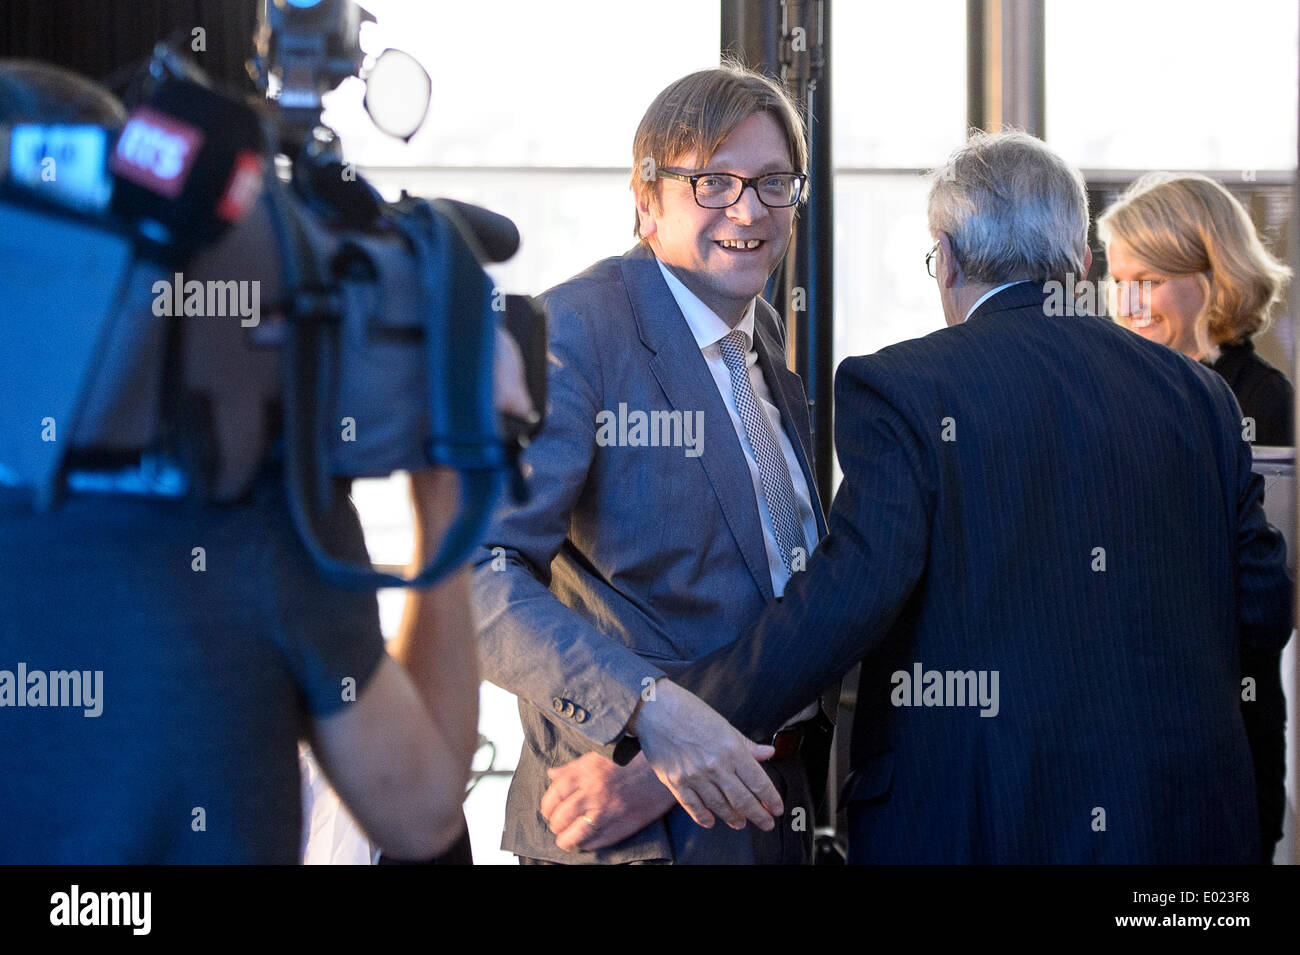 Brussels, Bxl, Belgium. 29th Apr, 2014. Guy Verhofstadt, top candidate of Liberals (ALDE) ahead of Euranet's 'Big Crunch' Presidential debate at the EU parliament in Brussels, Belgium on 29.04.2014 The four top candidates for the presidency of the European Commission - Jean-Claude Juncker, Ska Keller, Martin Schulz and Guy Verhofstadt - attend EU-wide debate organized by EuranetPlus and focused on the major election topics. by Wiktor Dabkowski Credit:  Wiktor Dabkowski/ZUMAPRESS.com/Alamy Live News Stock Photo